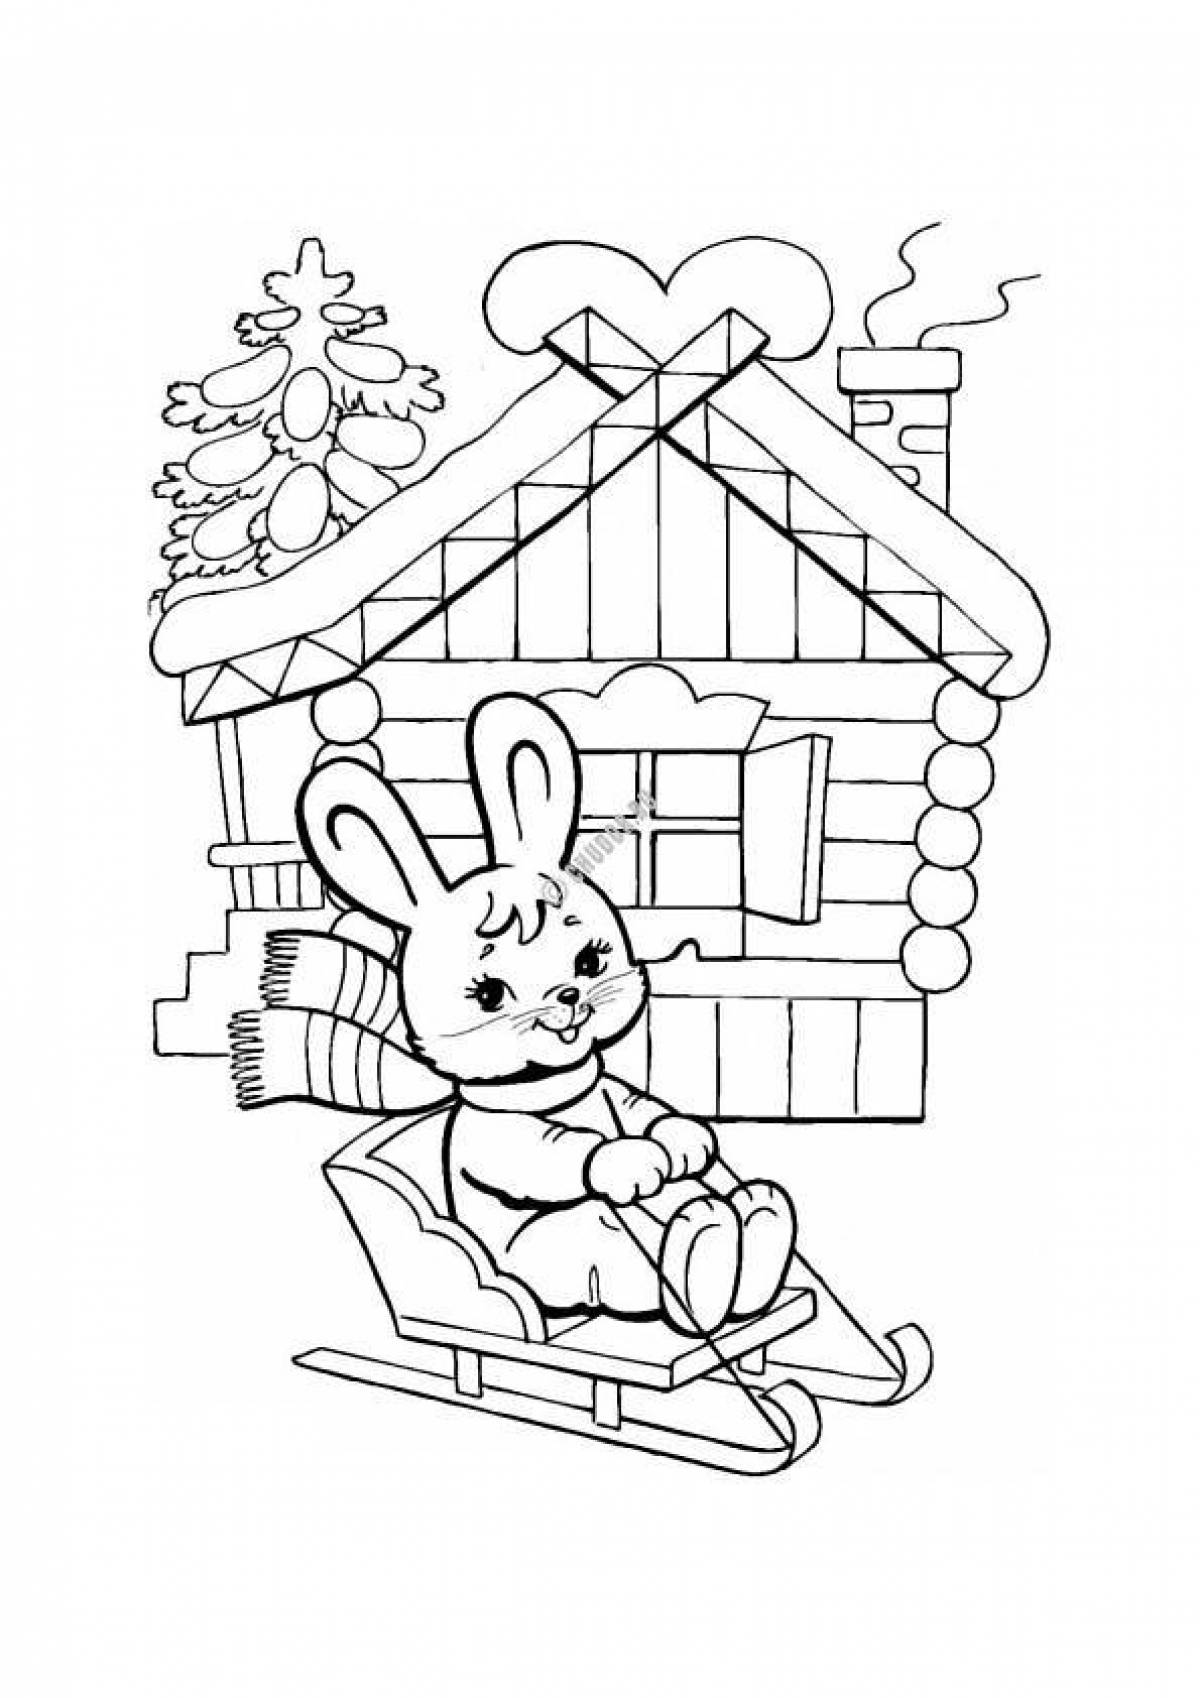 Coloring page glorious bast and ice hut